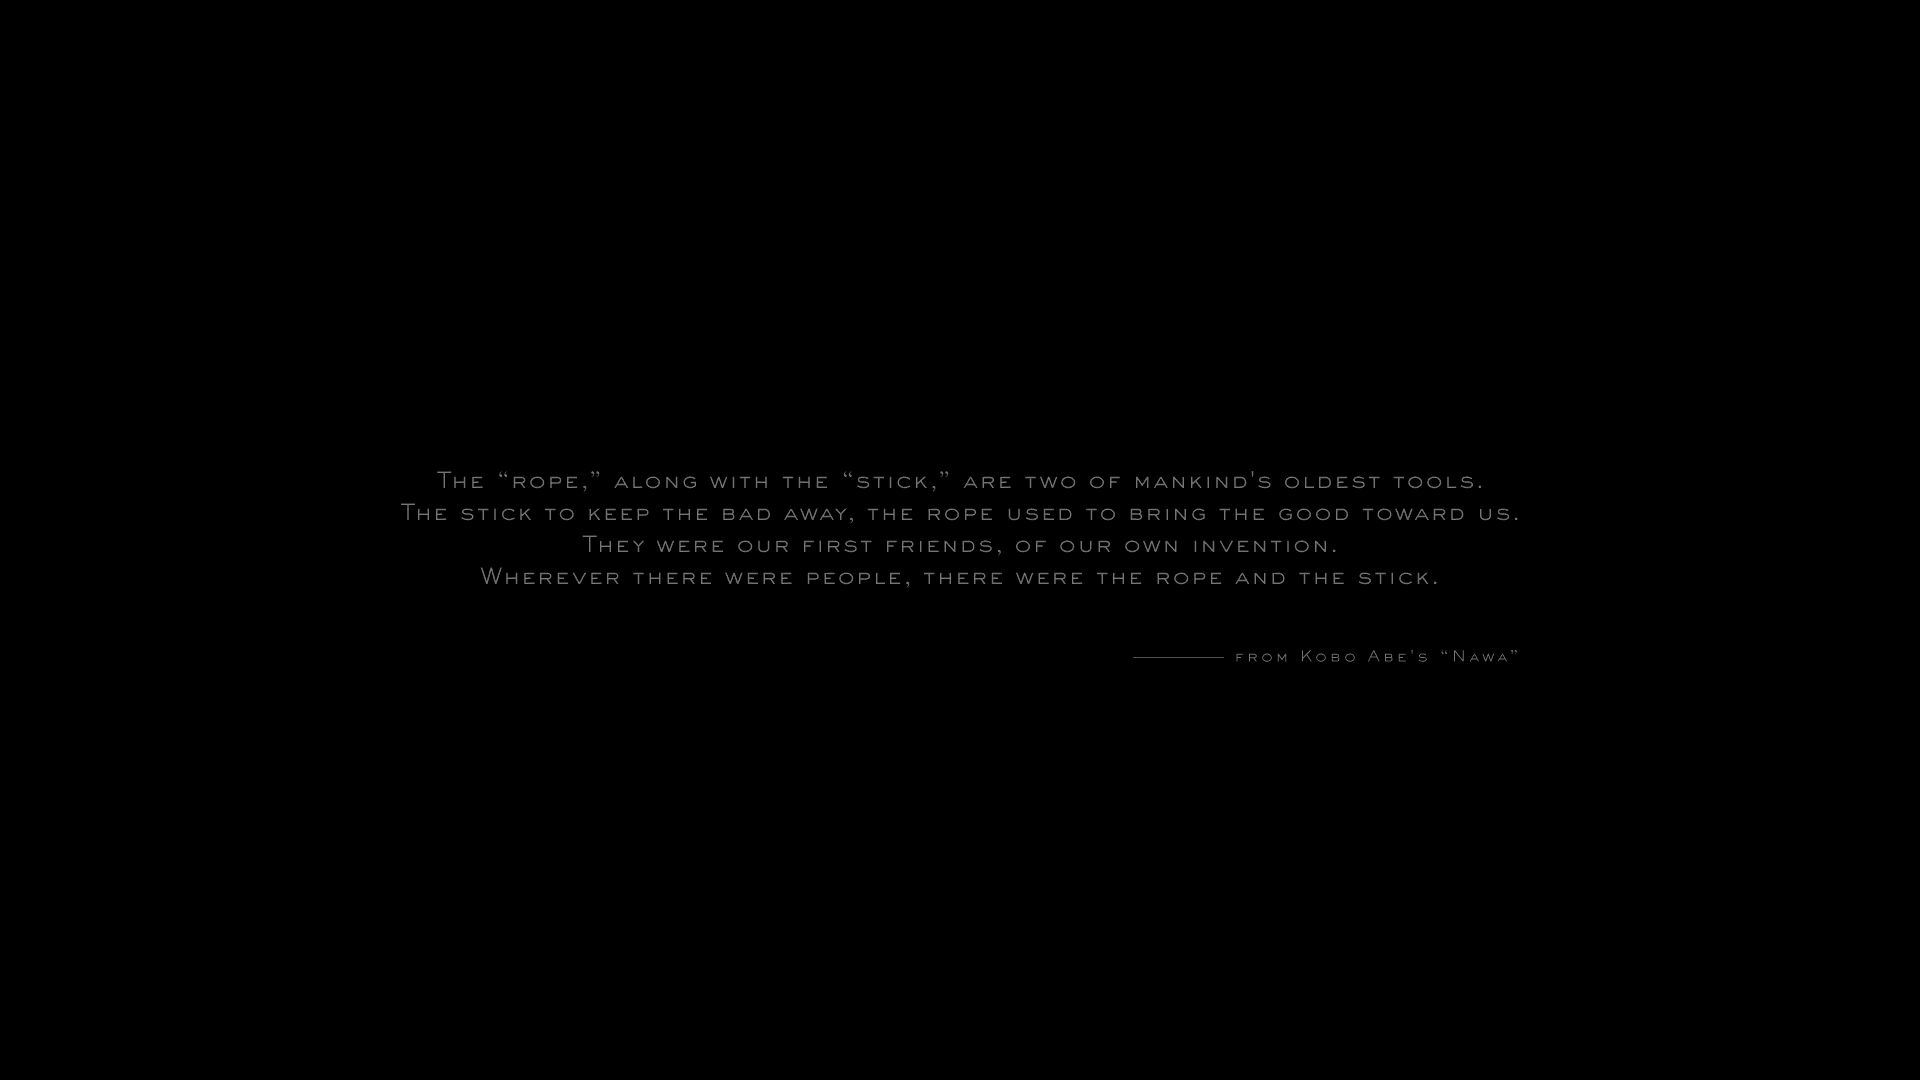 Video Game Art Death Stranding Quote 1920x1080